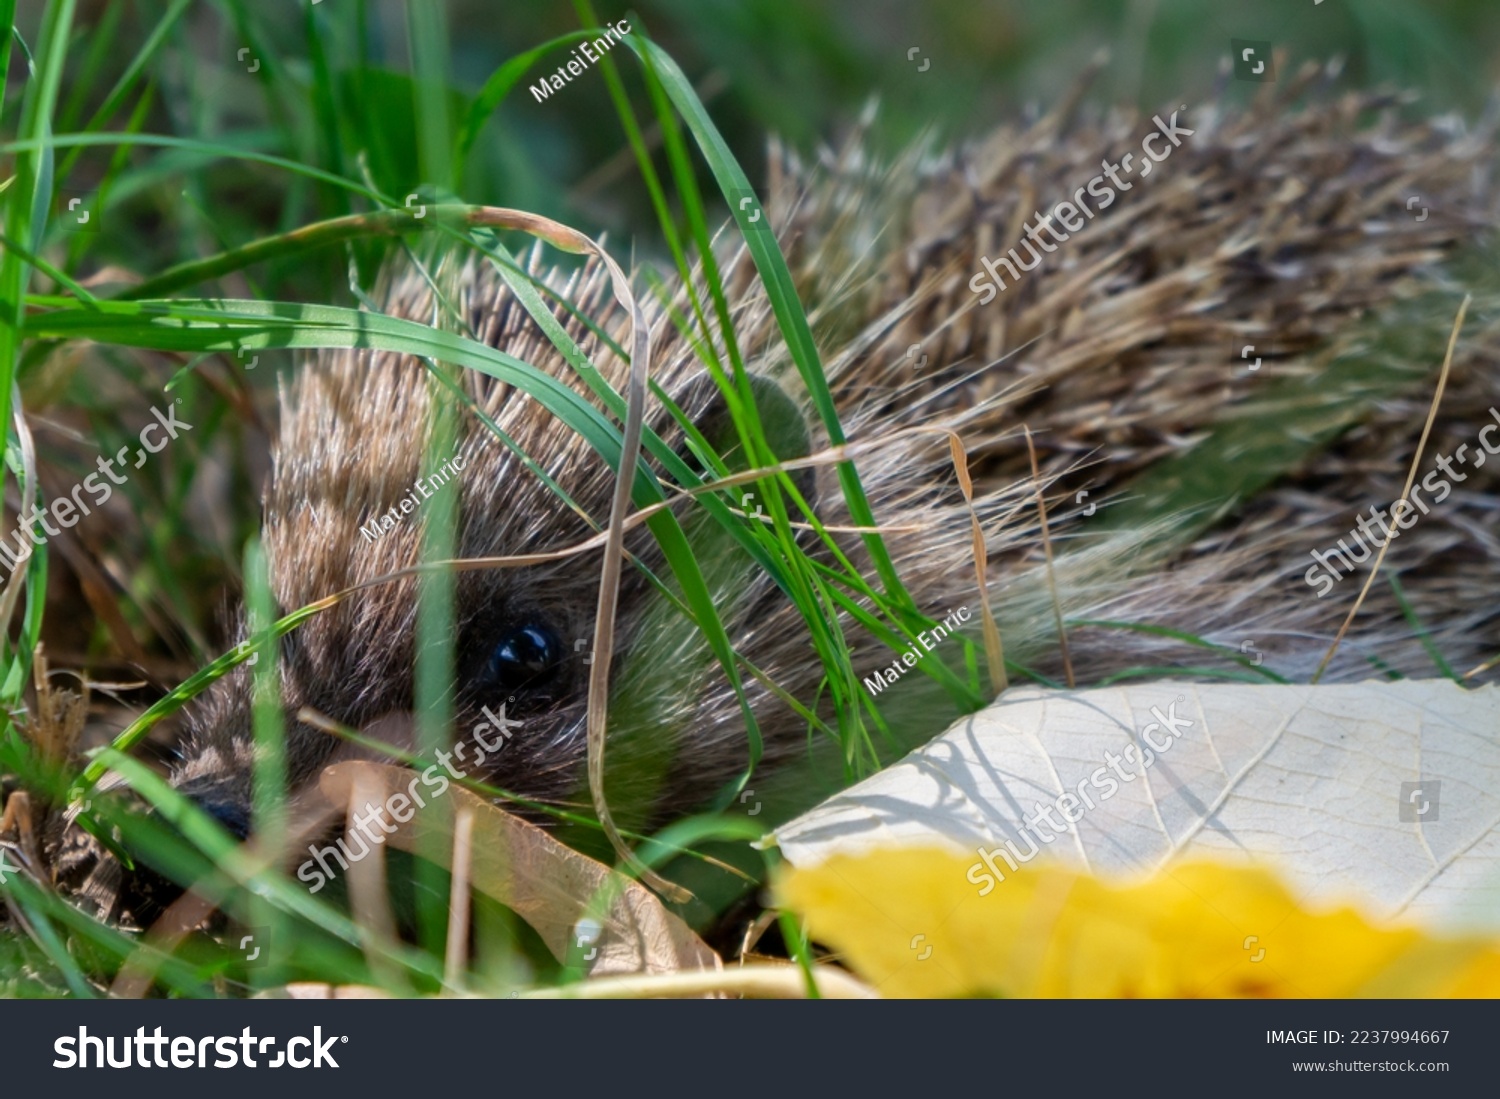 A small hedgehog hiding among the blades of grass and leaves, looking at the camera. #2237994667